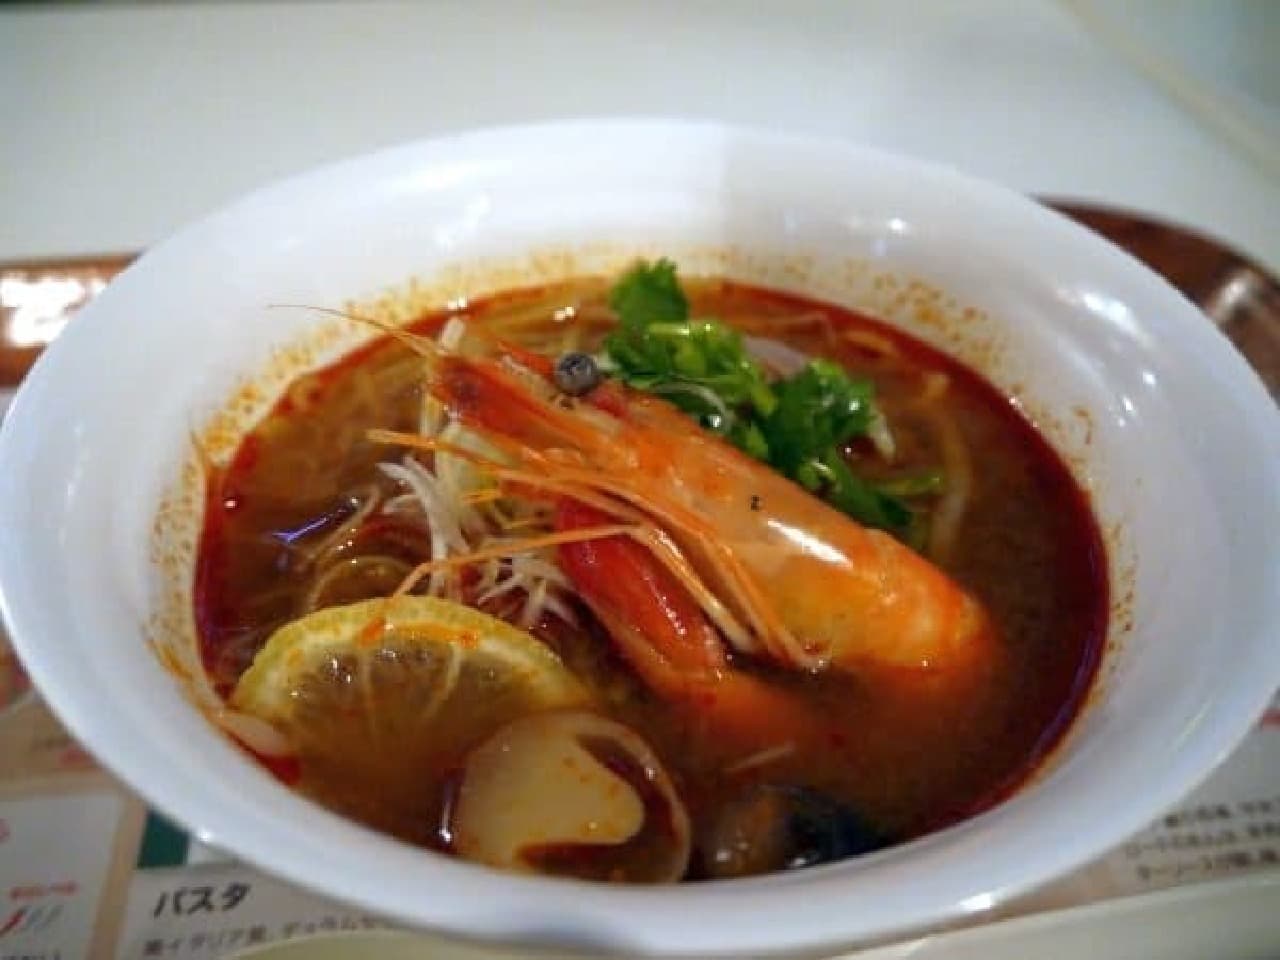 Tom Yum Kung noodles. The spiciness is also quite good.